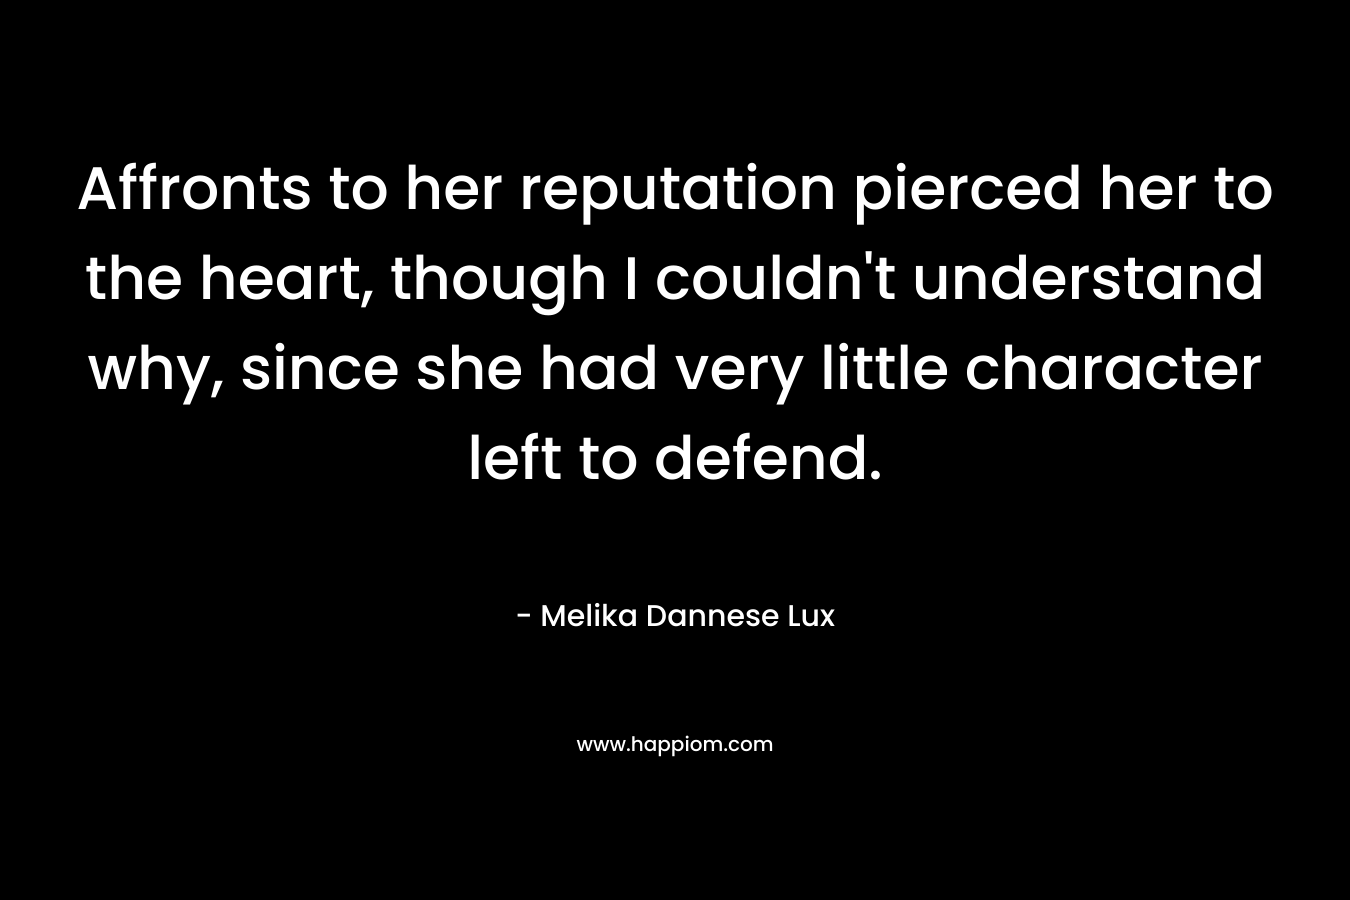 Affronts to her reputation pierced her to the heart, though I couldn’t understand why, since she had very little character left to defend. – Melika Dannese Lux